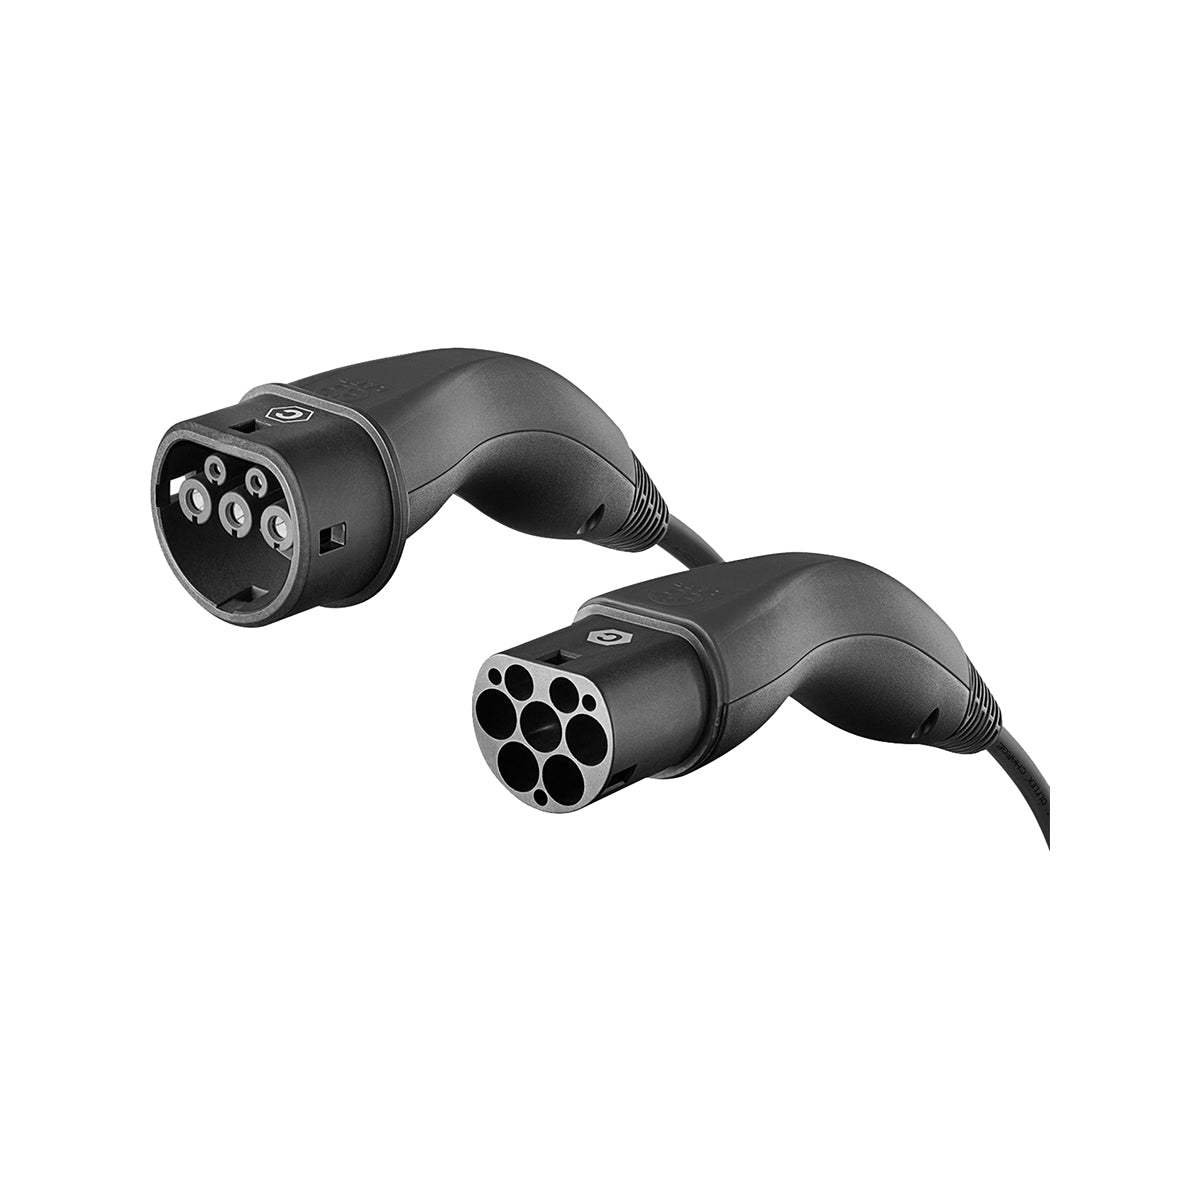 LAPP EV Helix Charge Cable Type 2 (7.4kW-1P-32A) 5m for Hybrid and Electric Cars - Black.